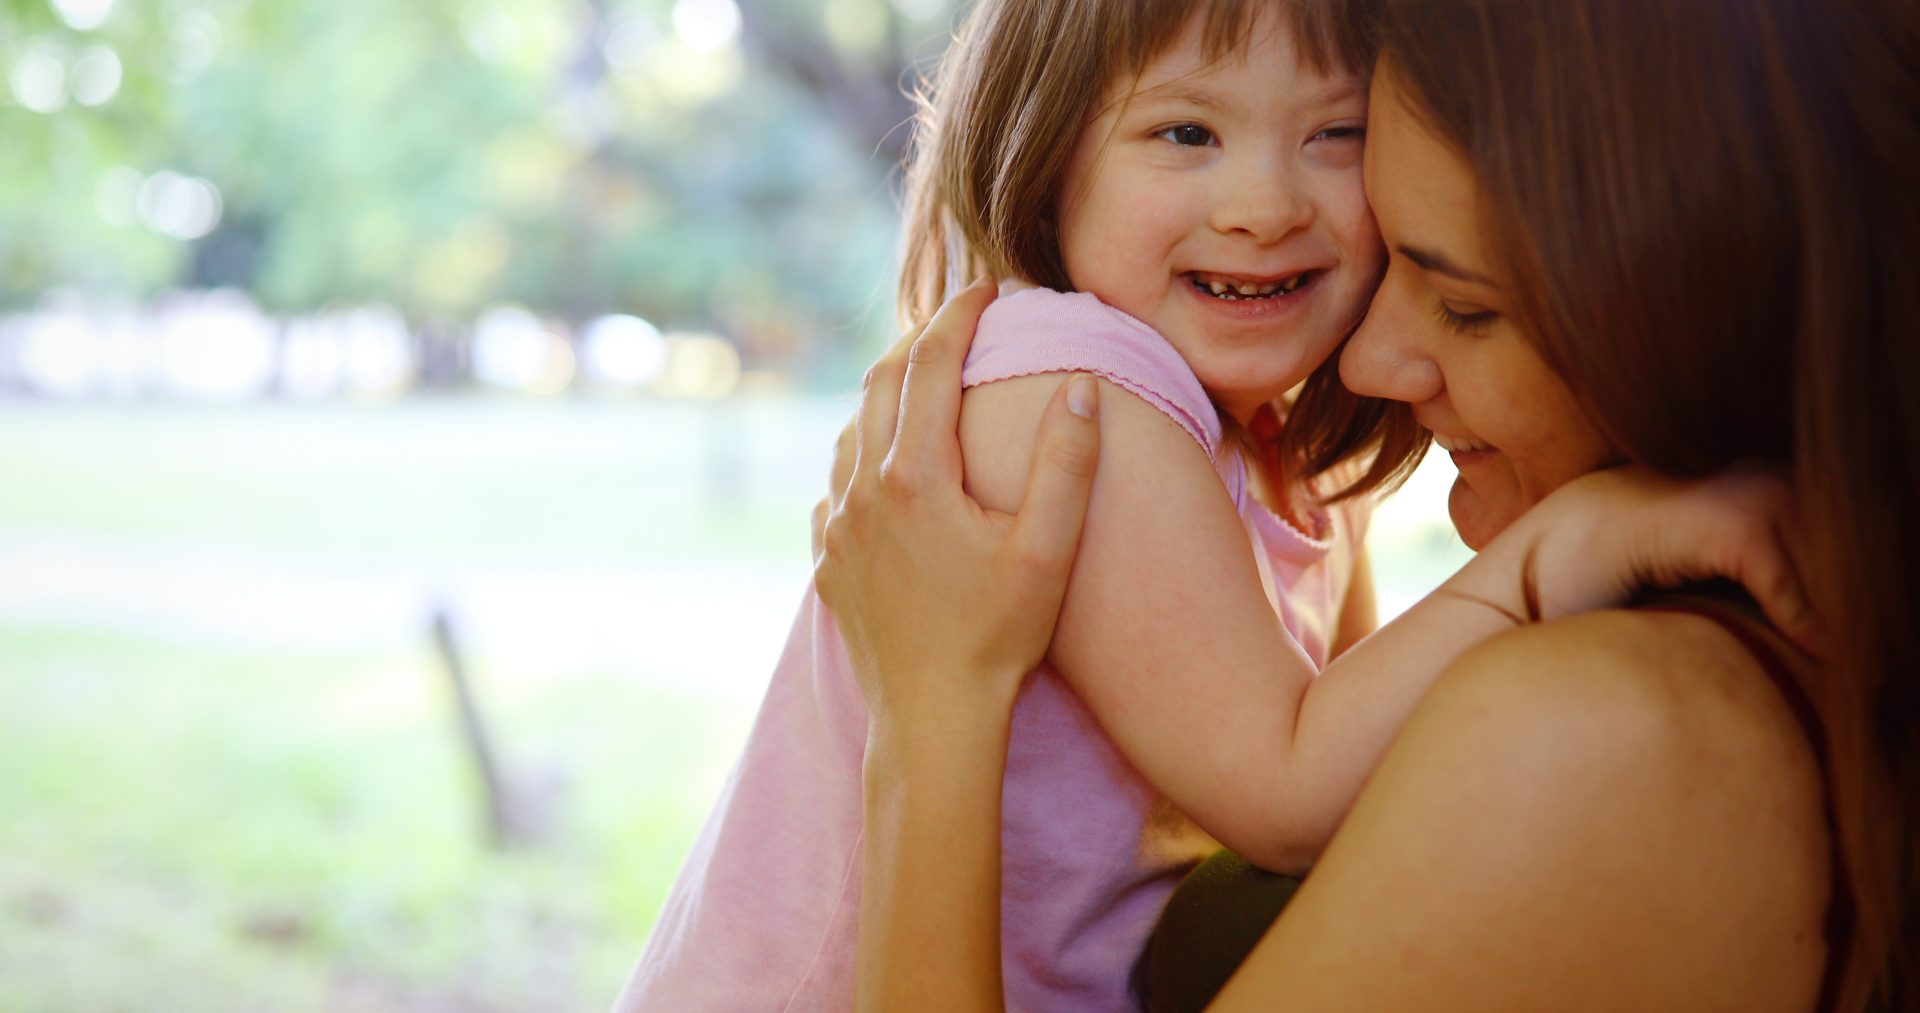 Woman with specials needs child, both embracing and smiling